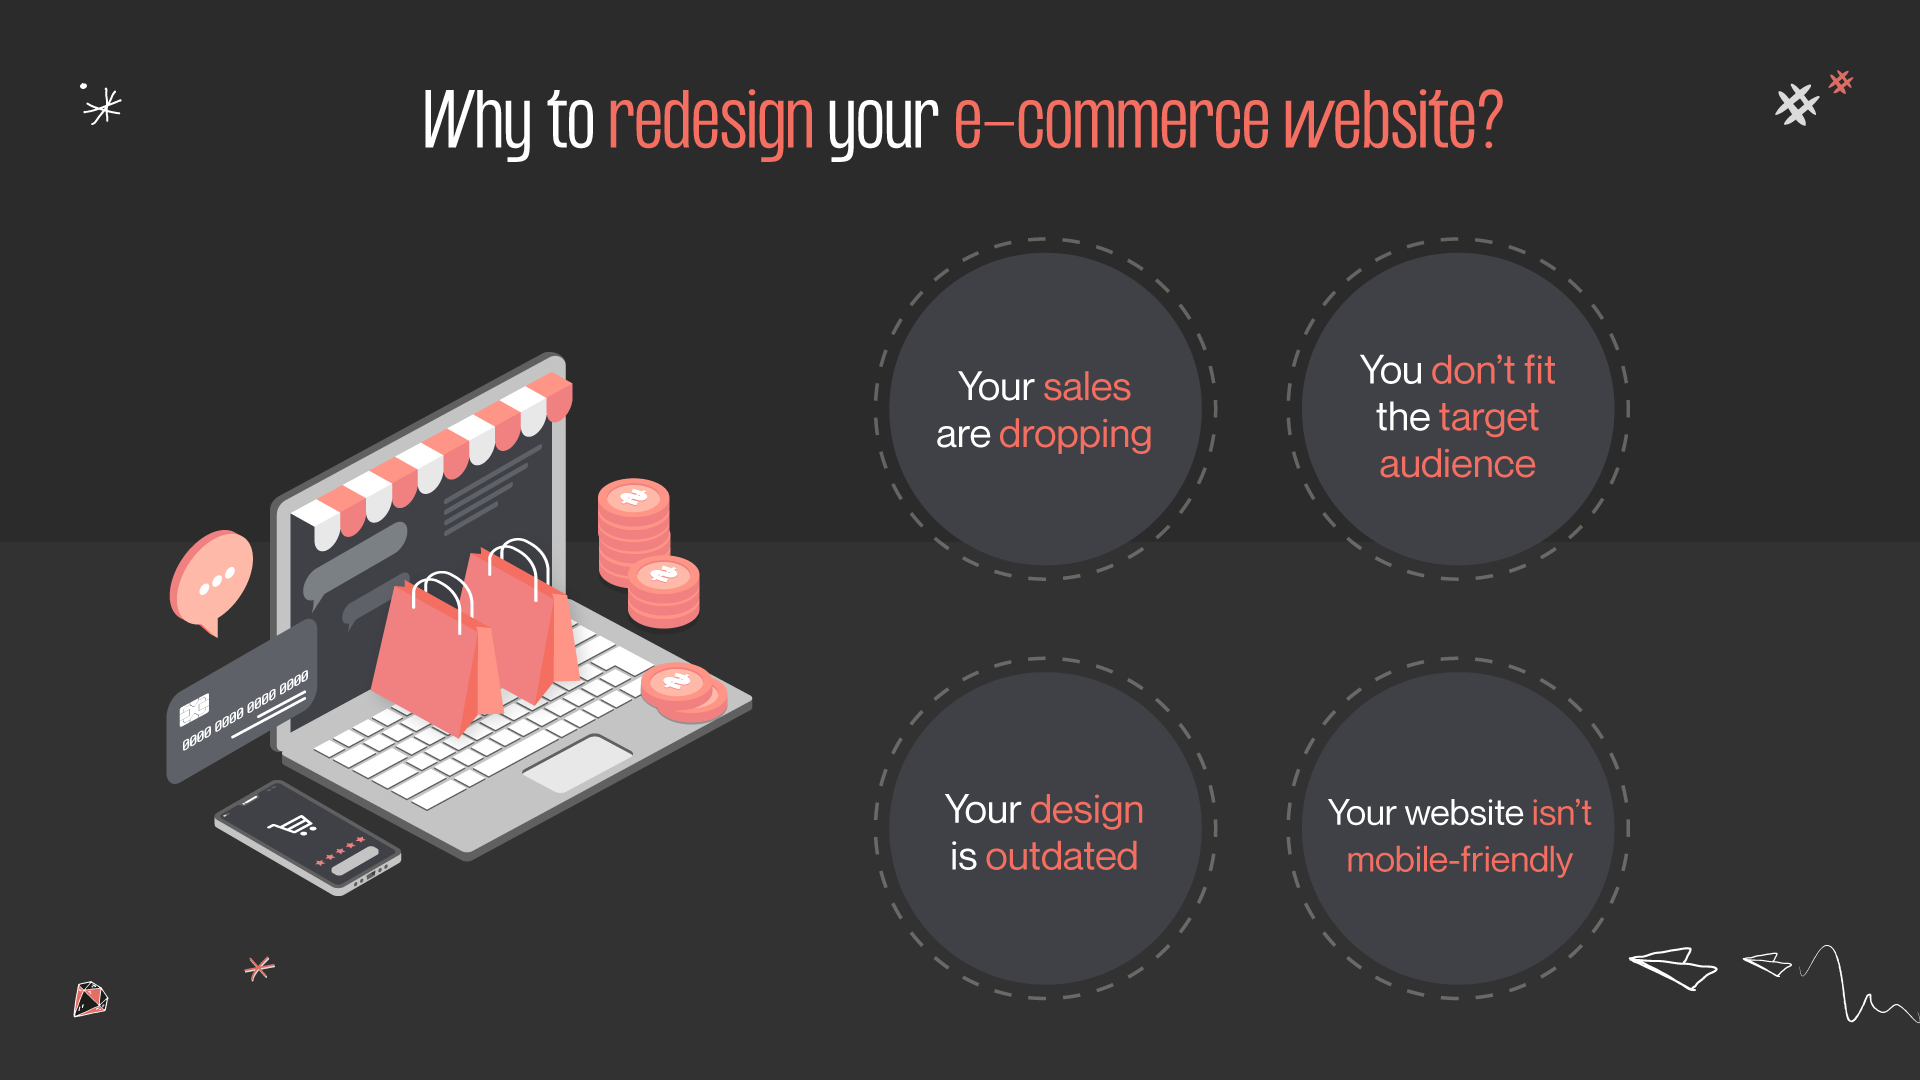 why to redesign an e-commerce website?